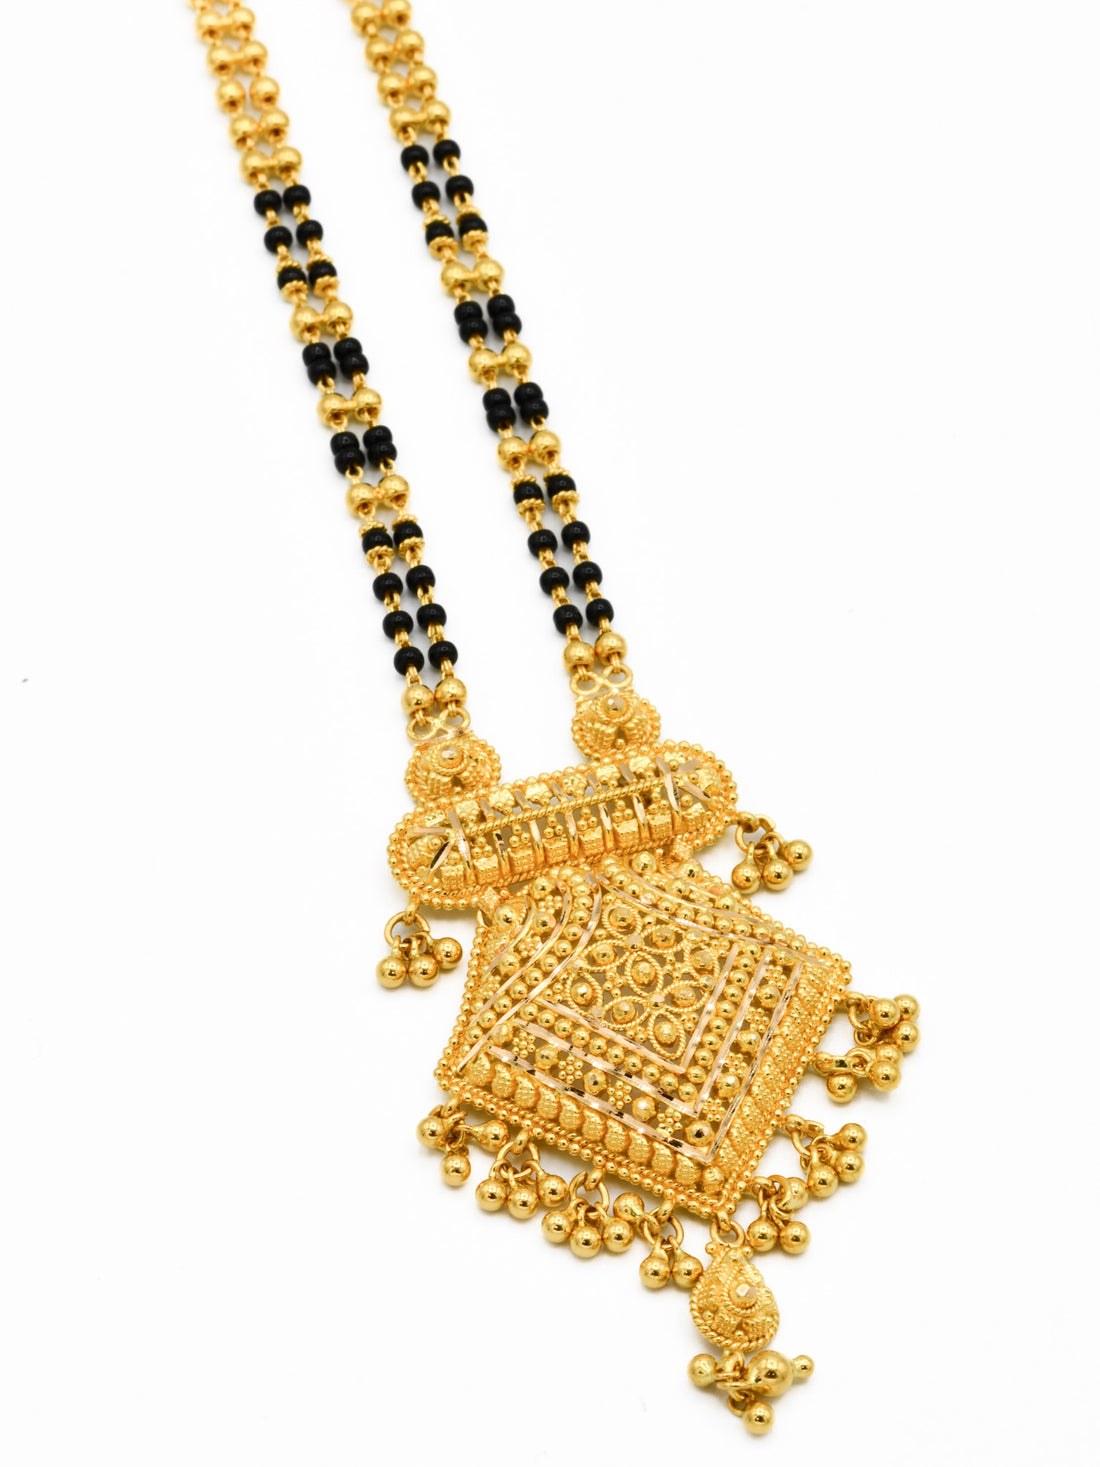 22ct Gold 2 Row Mangal Sutra